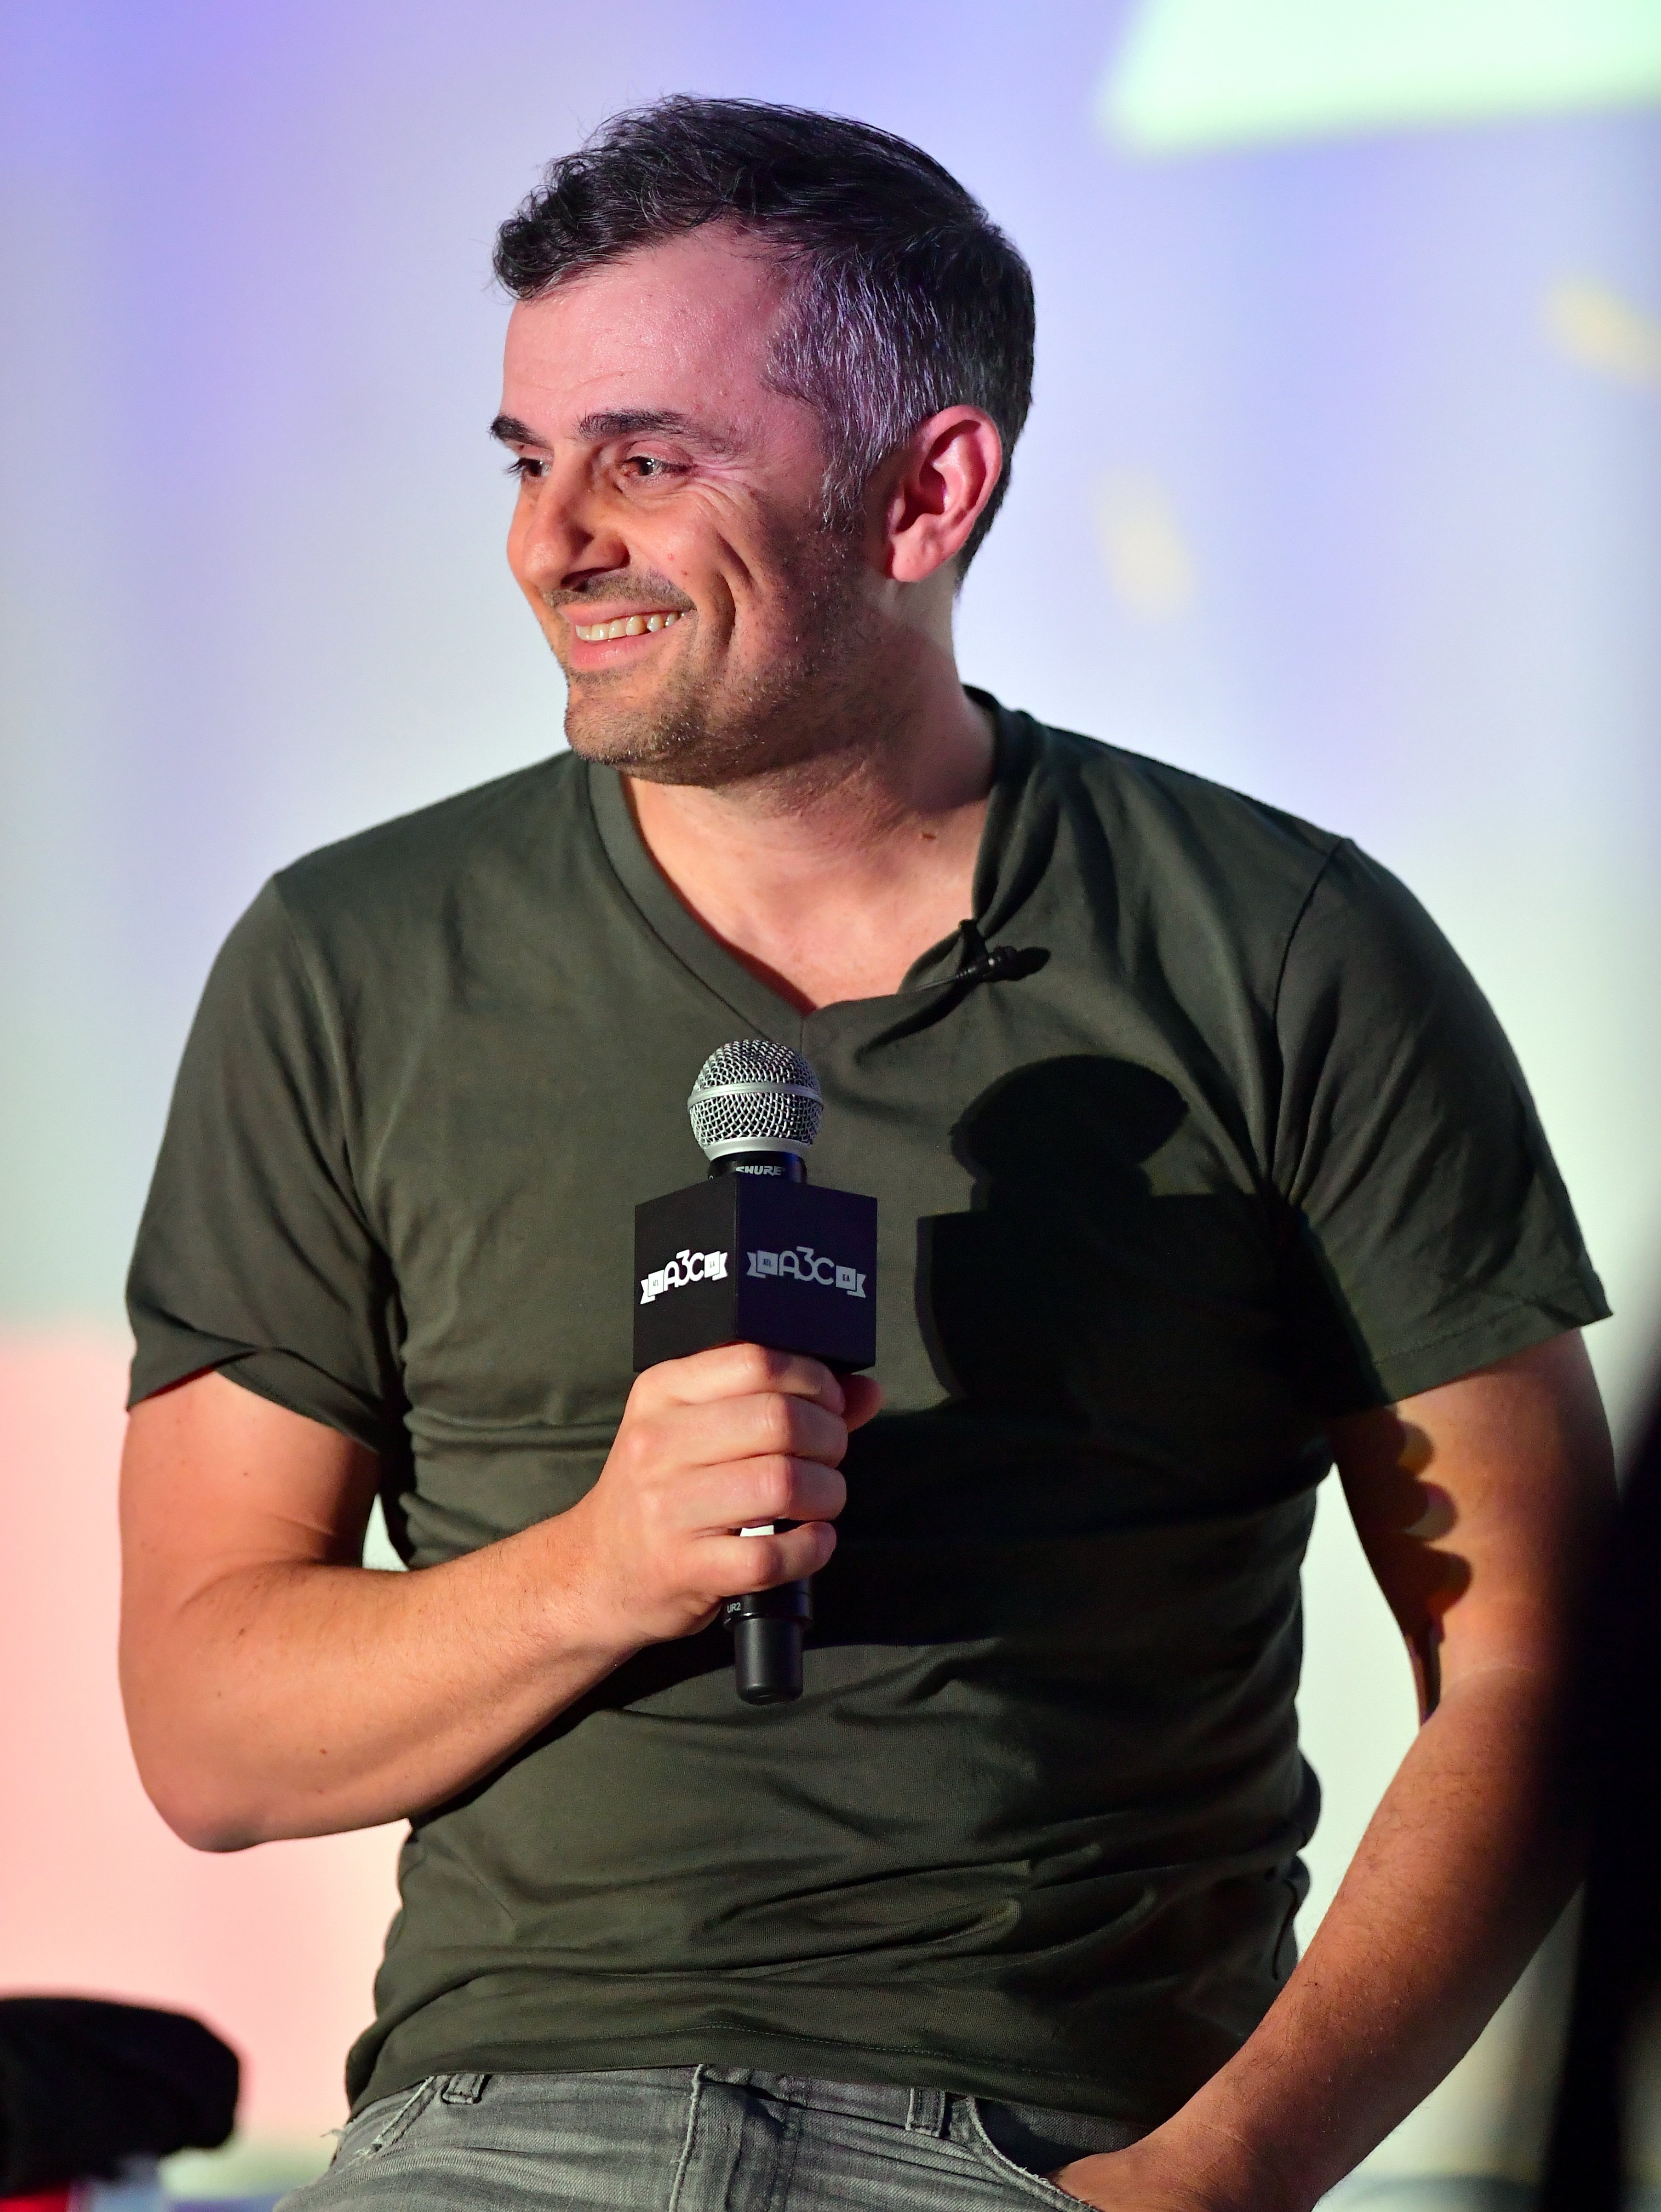 Gary Vaynerchuk at the 2019 A3C Festival & Conference at AmericasMart, in Atlanta, Georgia. | Source: Getty Images